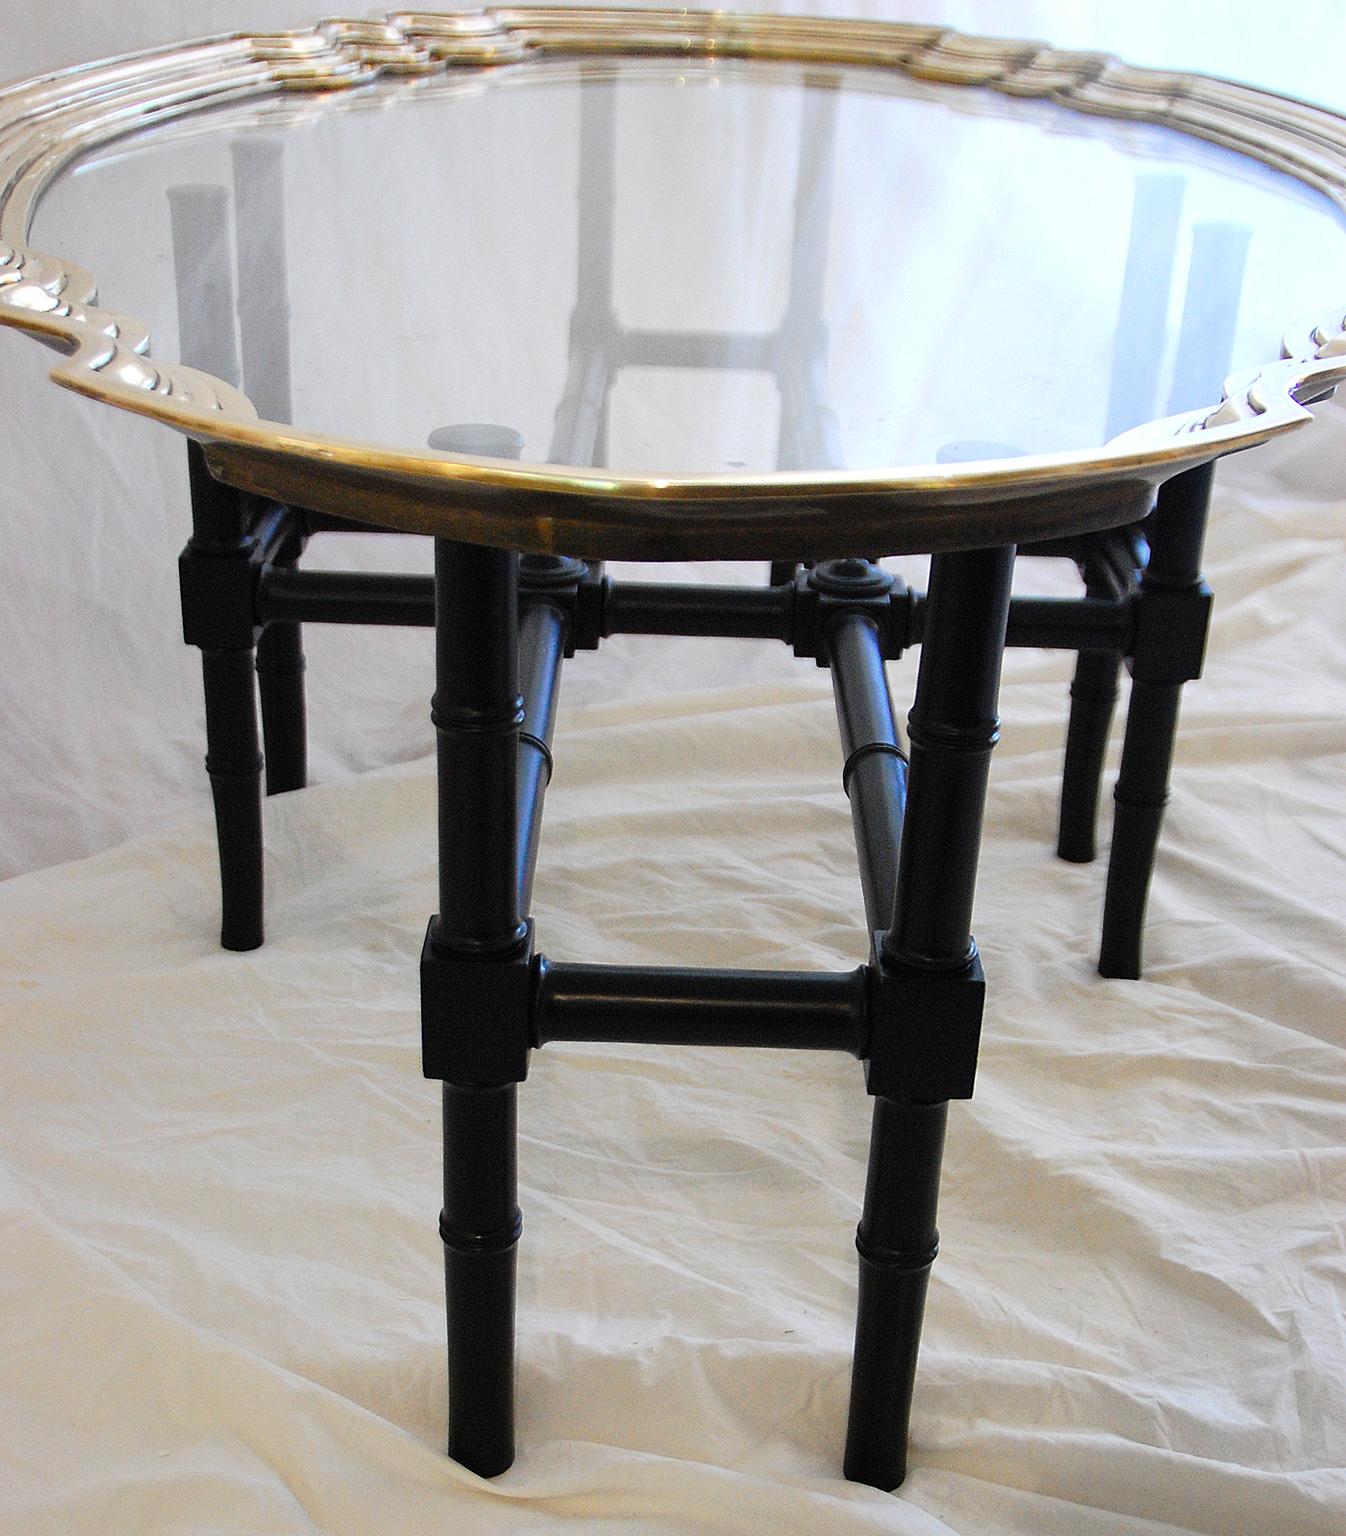 English Art Deco Brass and Glass Coffee Table 1